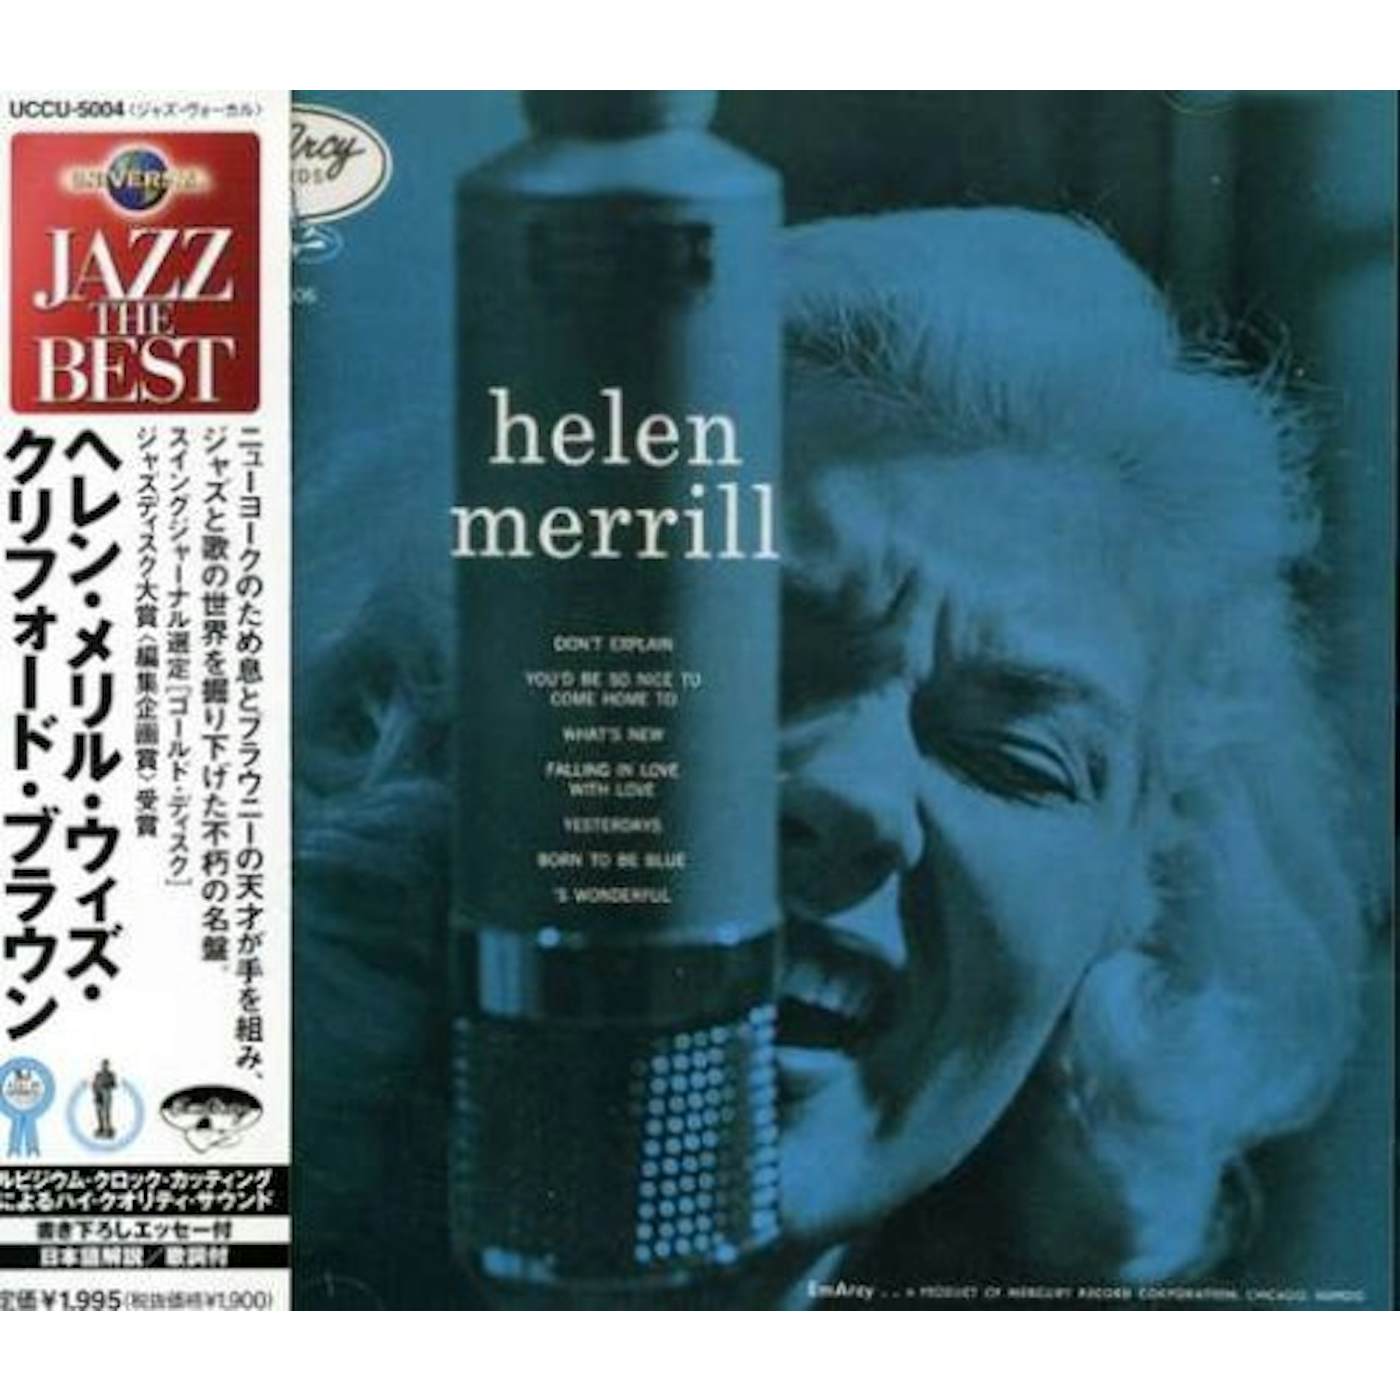 HELEN MERRILL WITH CLIFFORD BROWN CD